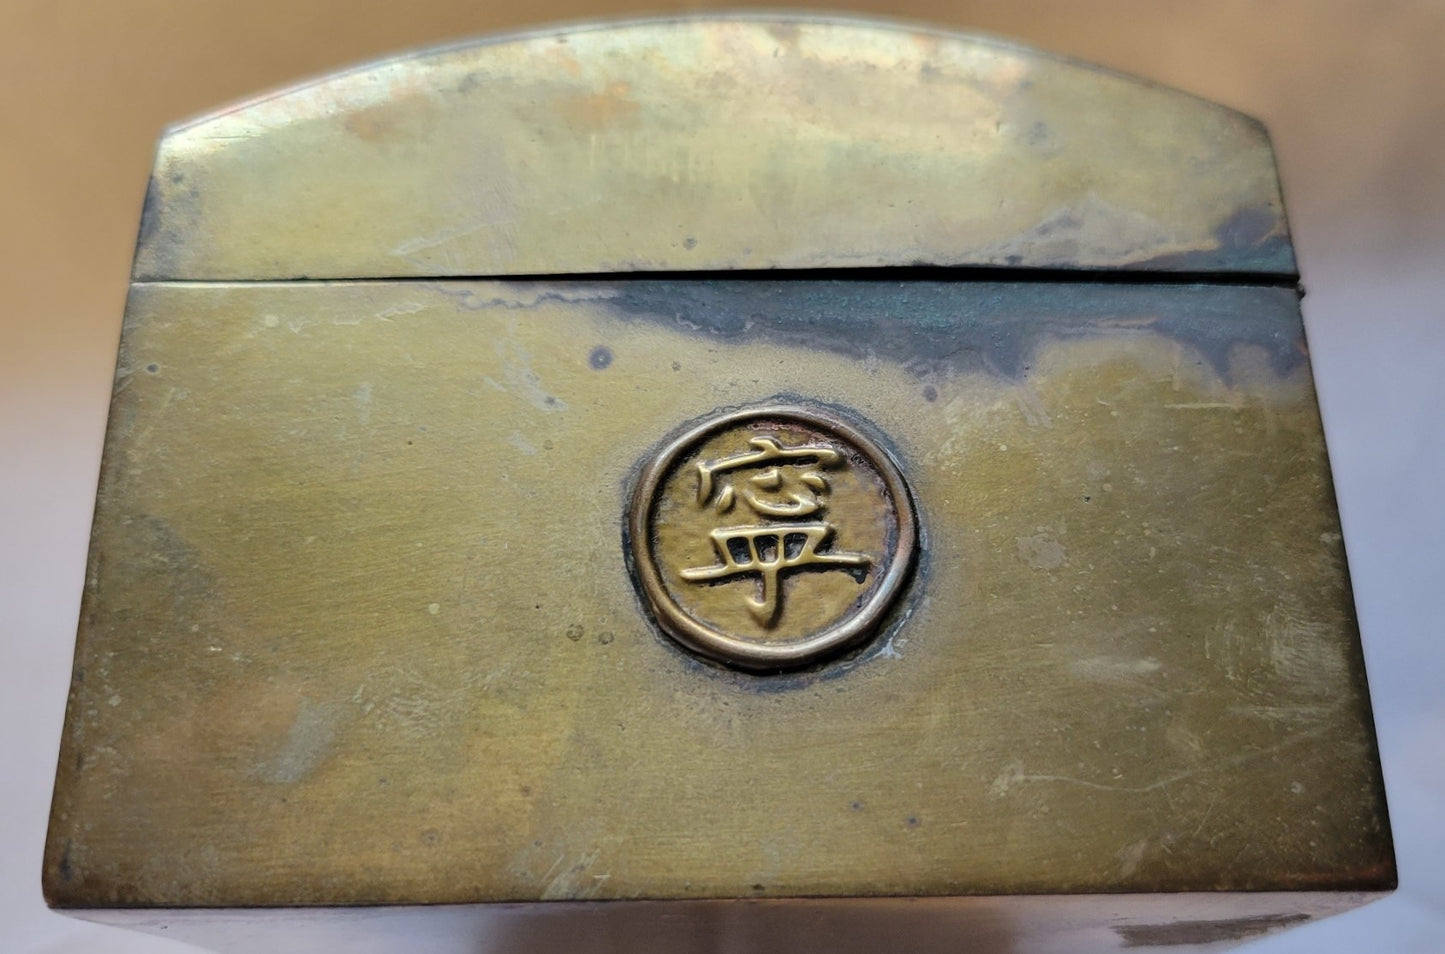 Antique brass box curio made in China, with a domed lid. The interior bottom has wood inserts on three side (one side is missing). The exterior has welded medallions with Chinese characters and designs. View of side.